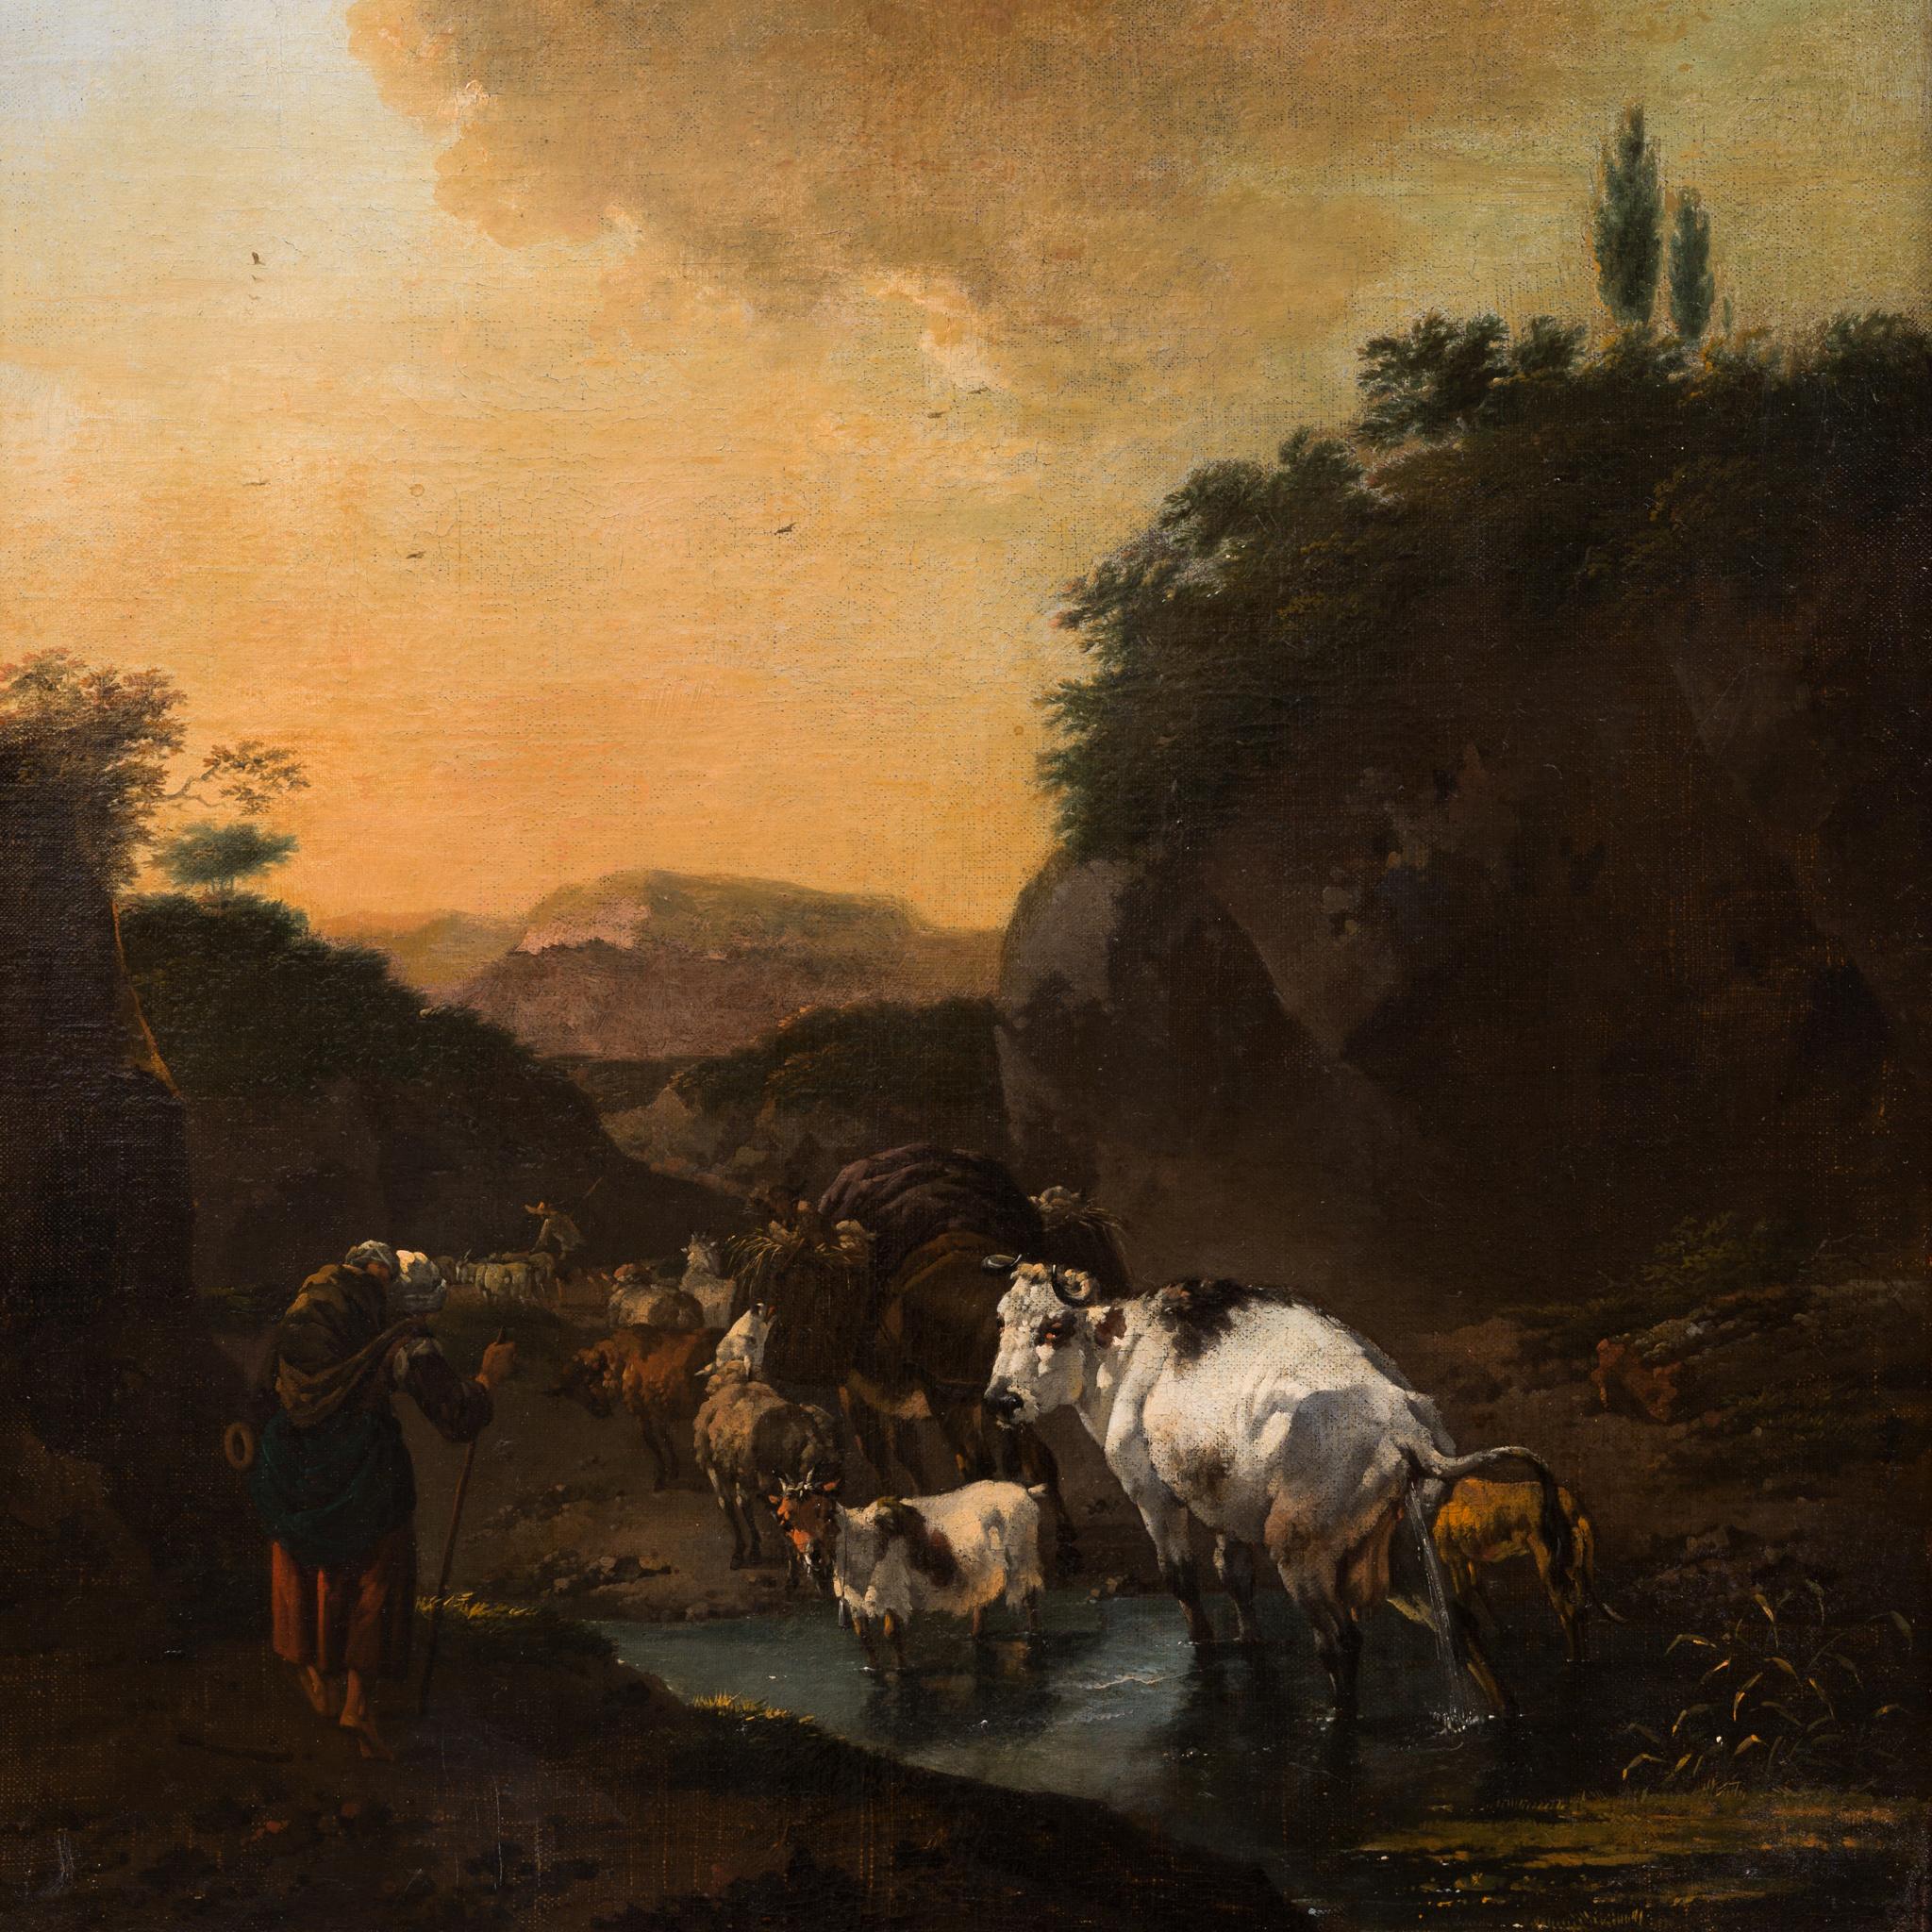 This painting depicts a pastoral scene that is attributed to the artist Jan Frans Soolmaker, an artist known for his Italianate landscapes and scenes that often feature equestrian and Arcadian elements. The painting is not signed but is attributed